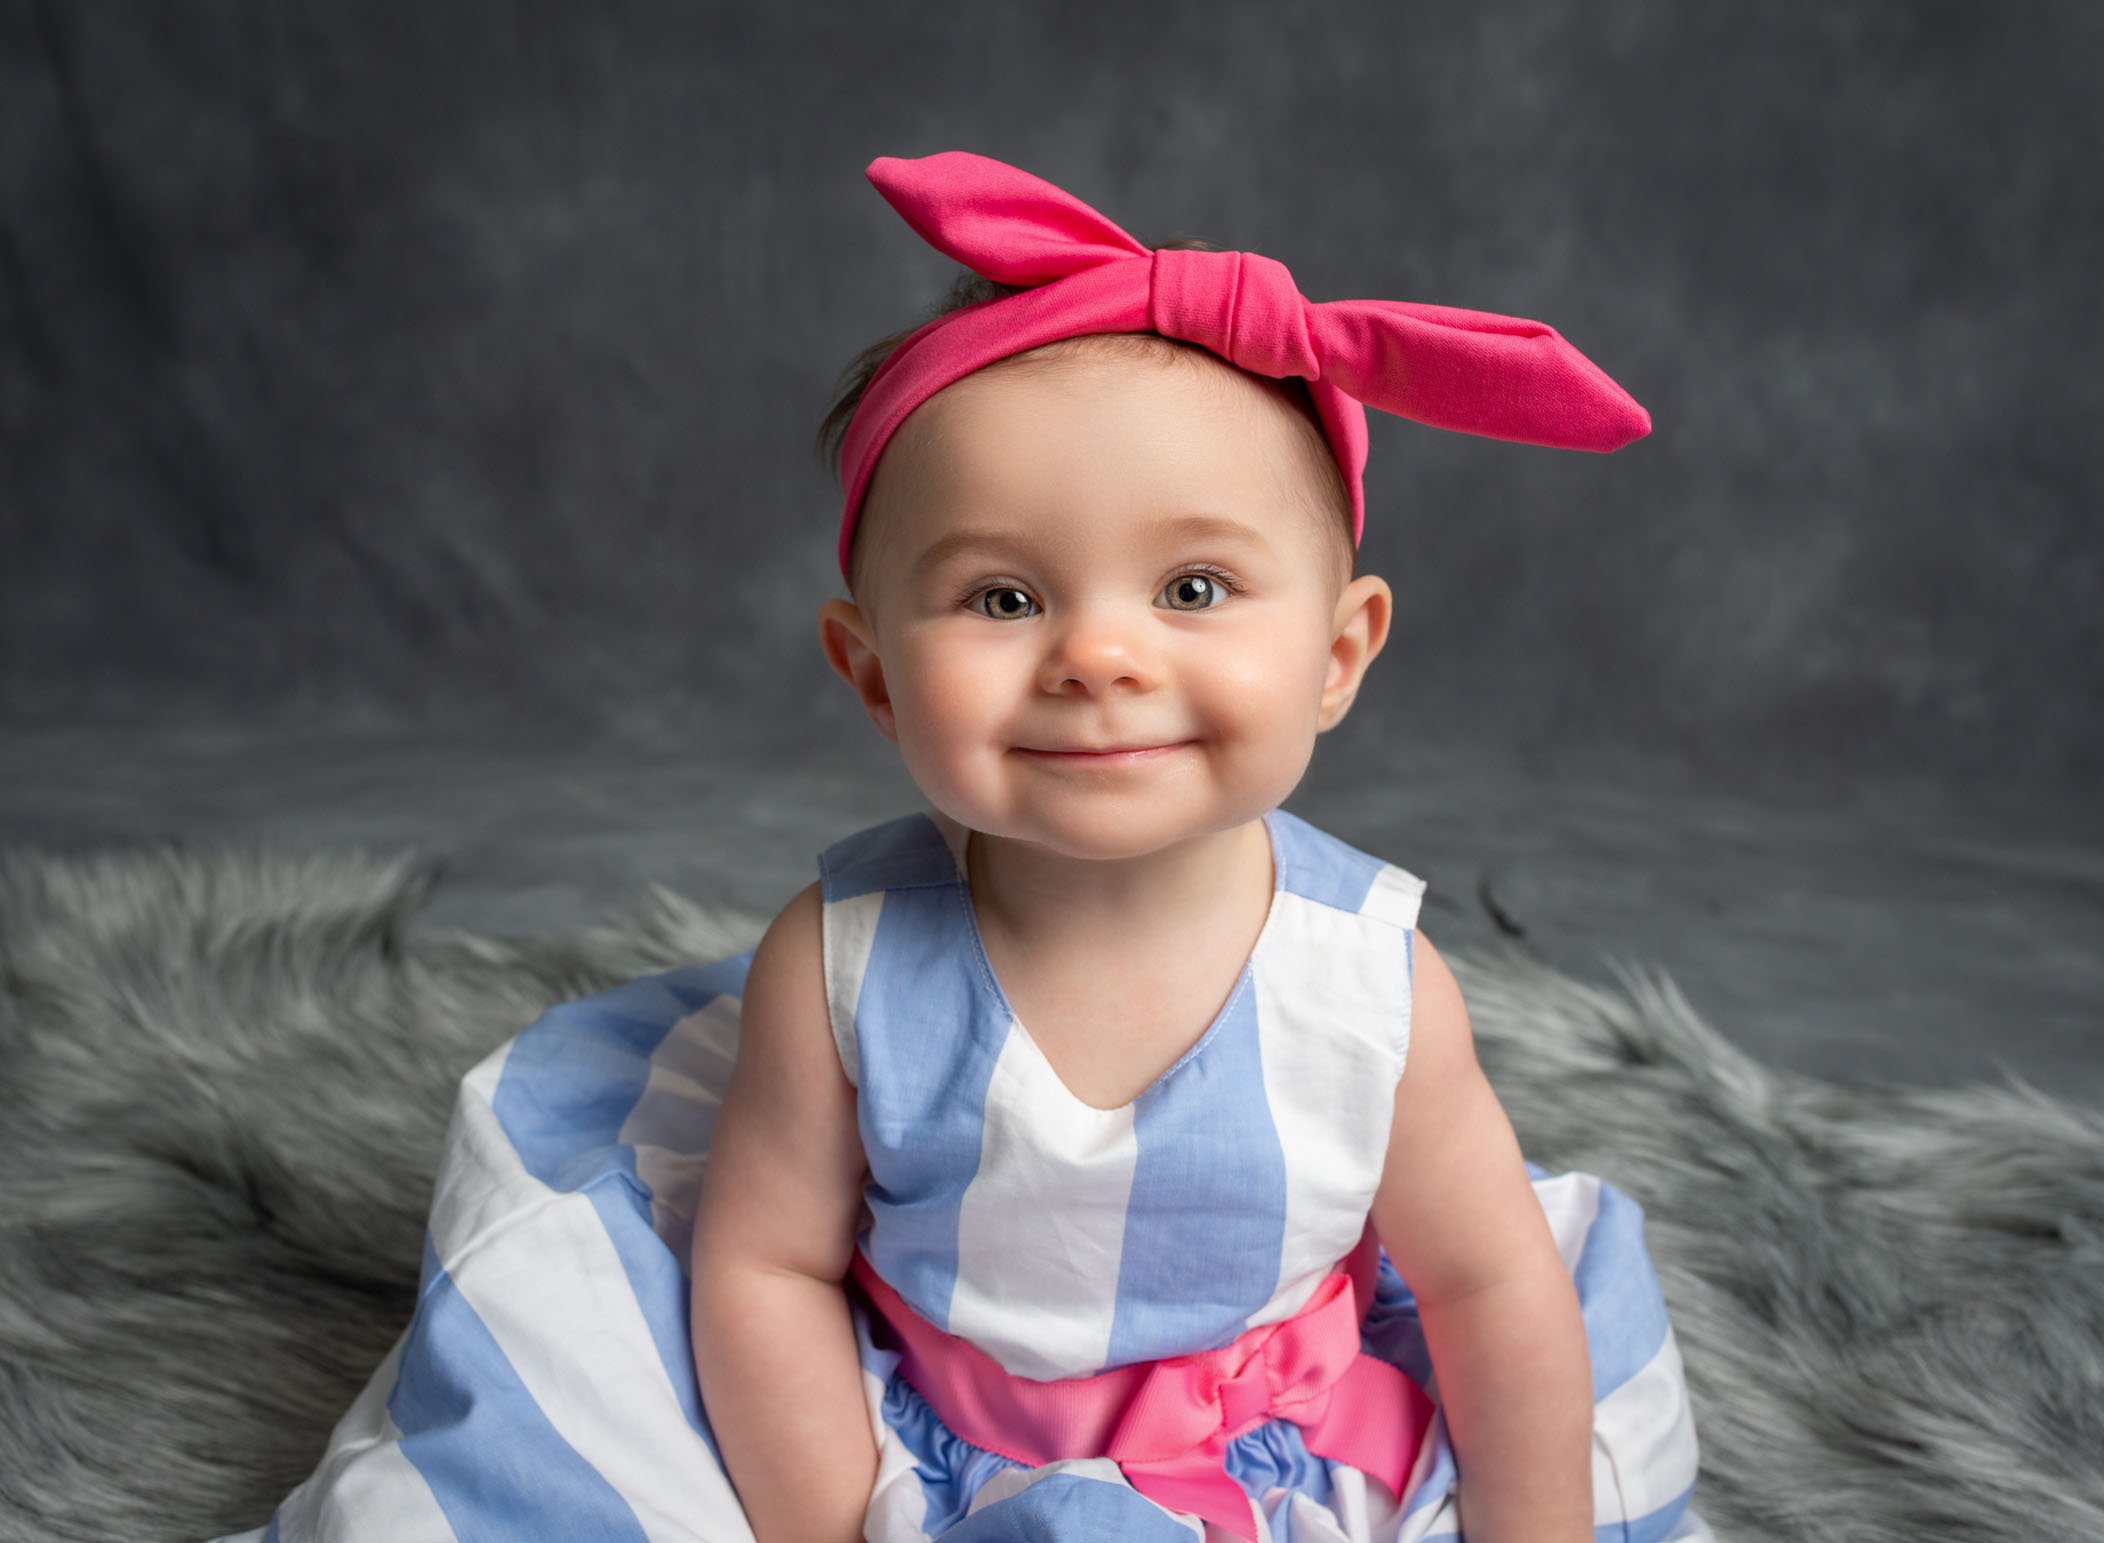 smiling baby girl sitting up on grey rug with large pink bow